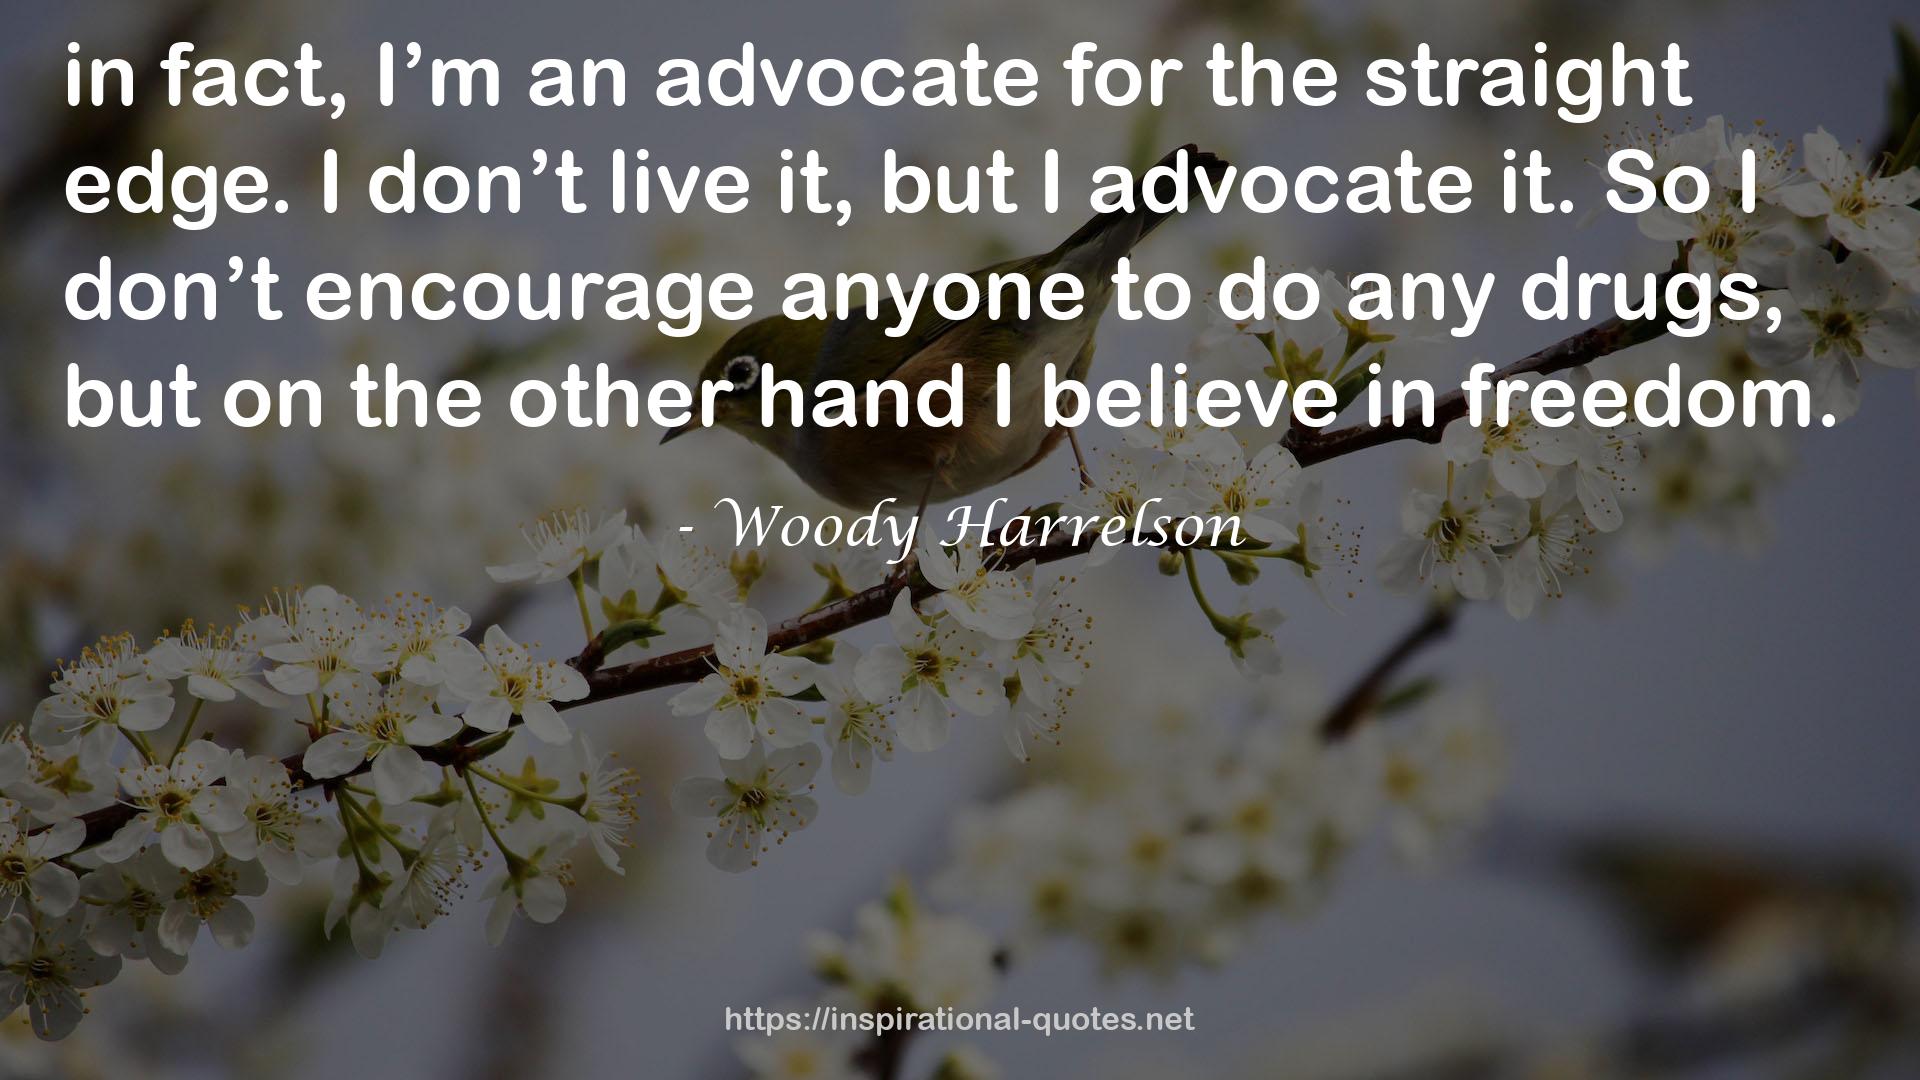 Woody Harrelson QUOTES